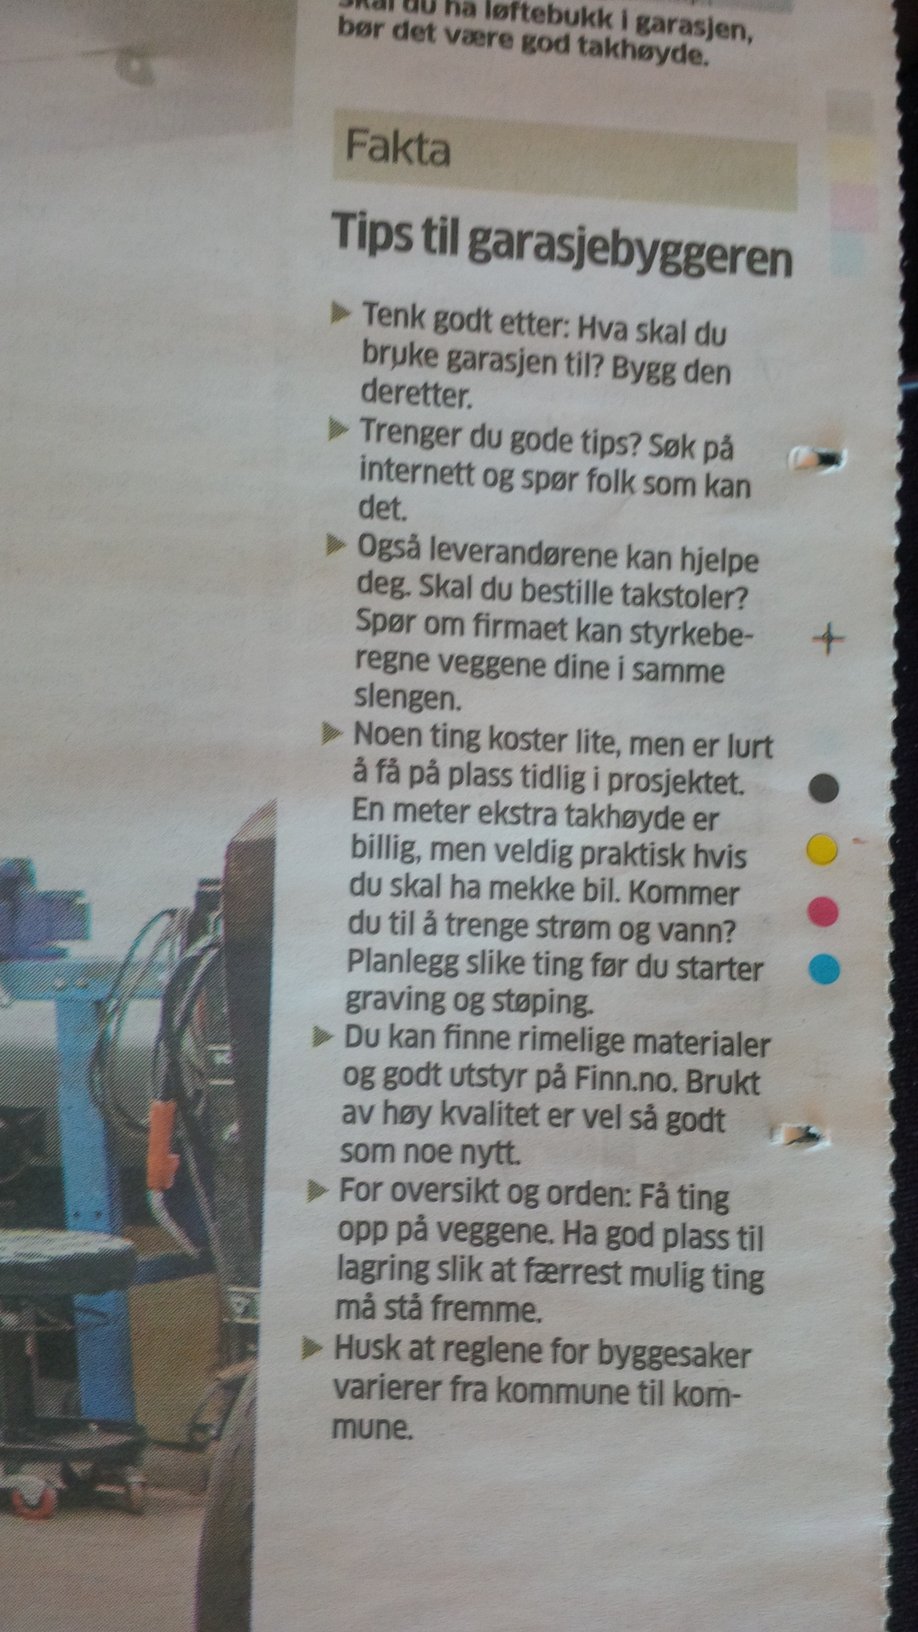 Copyright Aftenposten All rights reserved